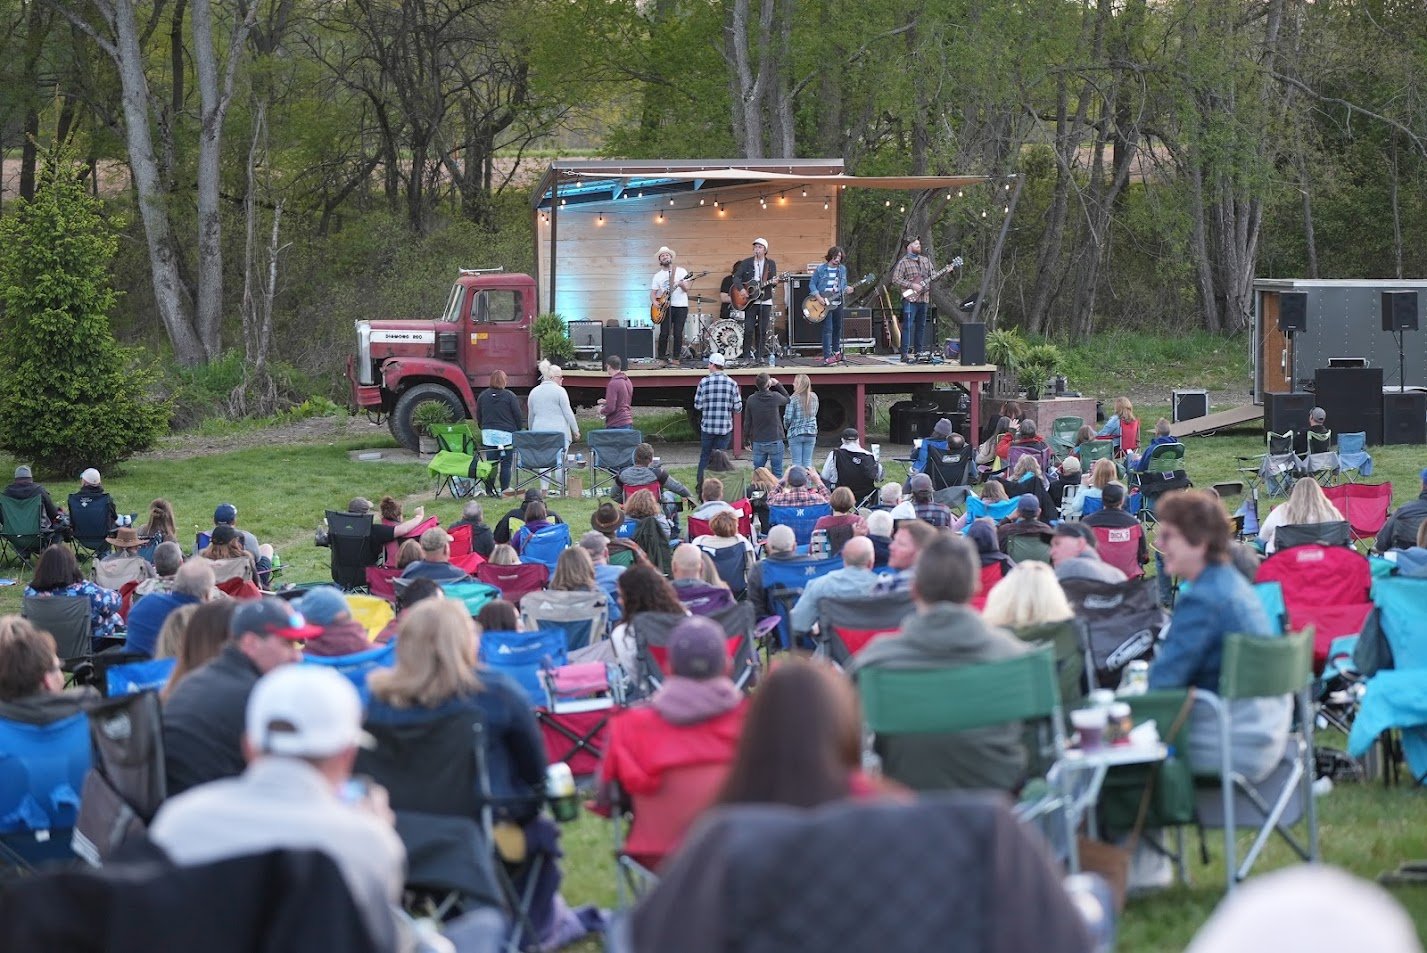 Poverty Knob to Host Free 9 Week Music Series at Port Farms this Summer